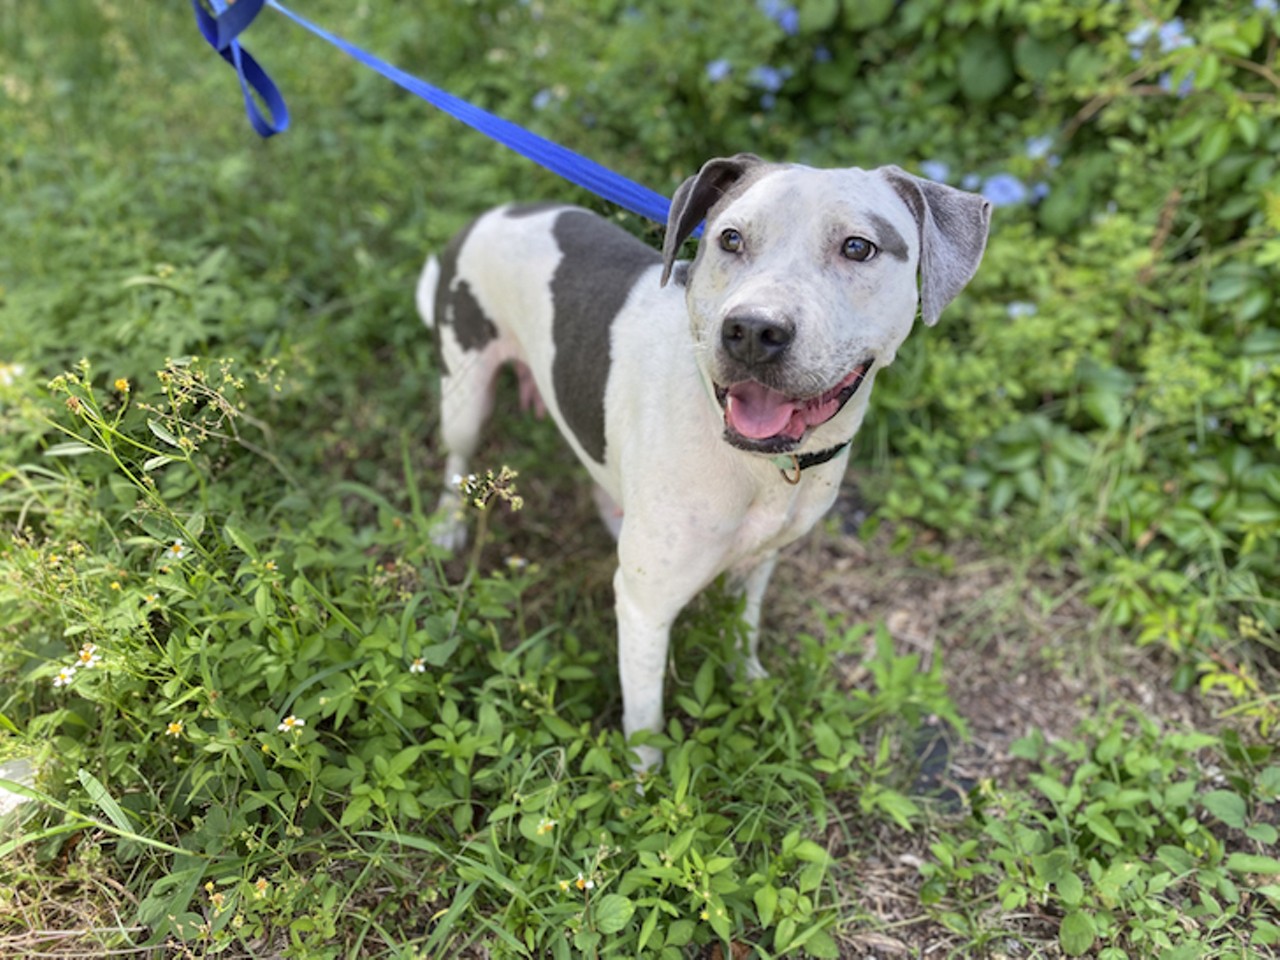 Adopt one of&nbsp;Pet&nbsp;Alliance of Greater Orlando's 'Shelter Crushes of the Week'